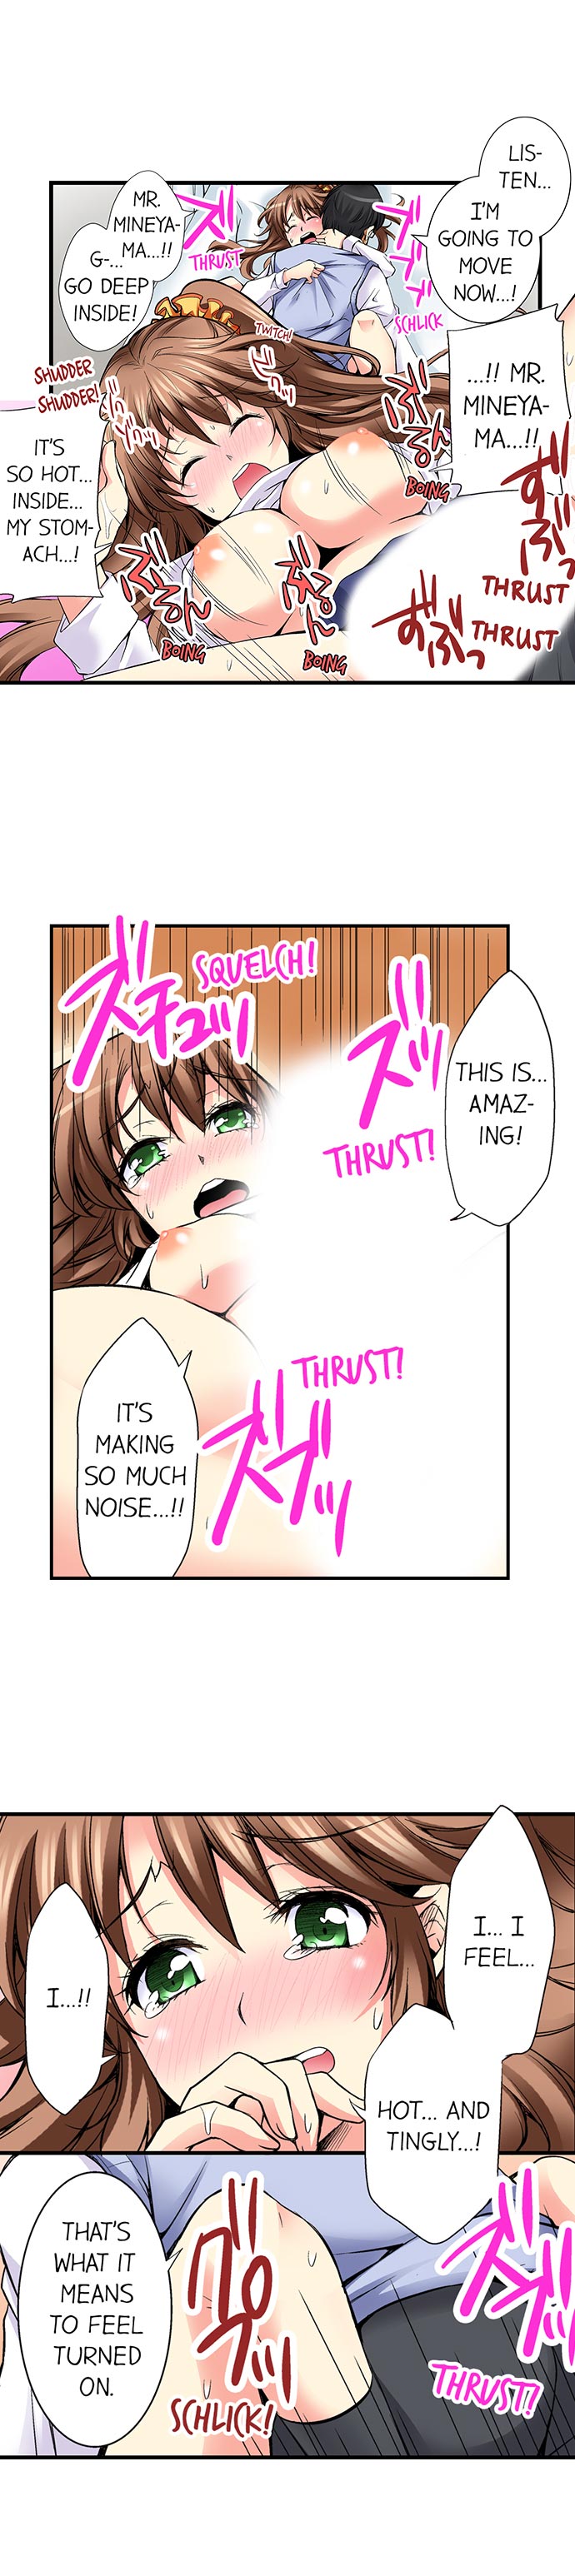 Why Can't i Have Sex With My Teacher? - Chapter 9 Page 6